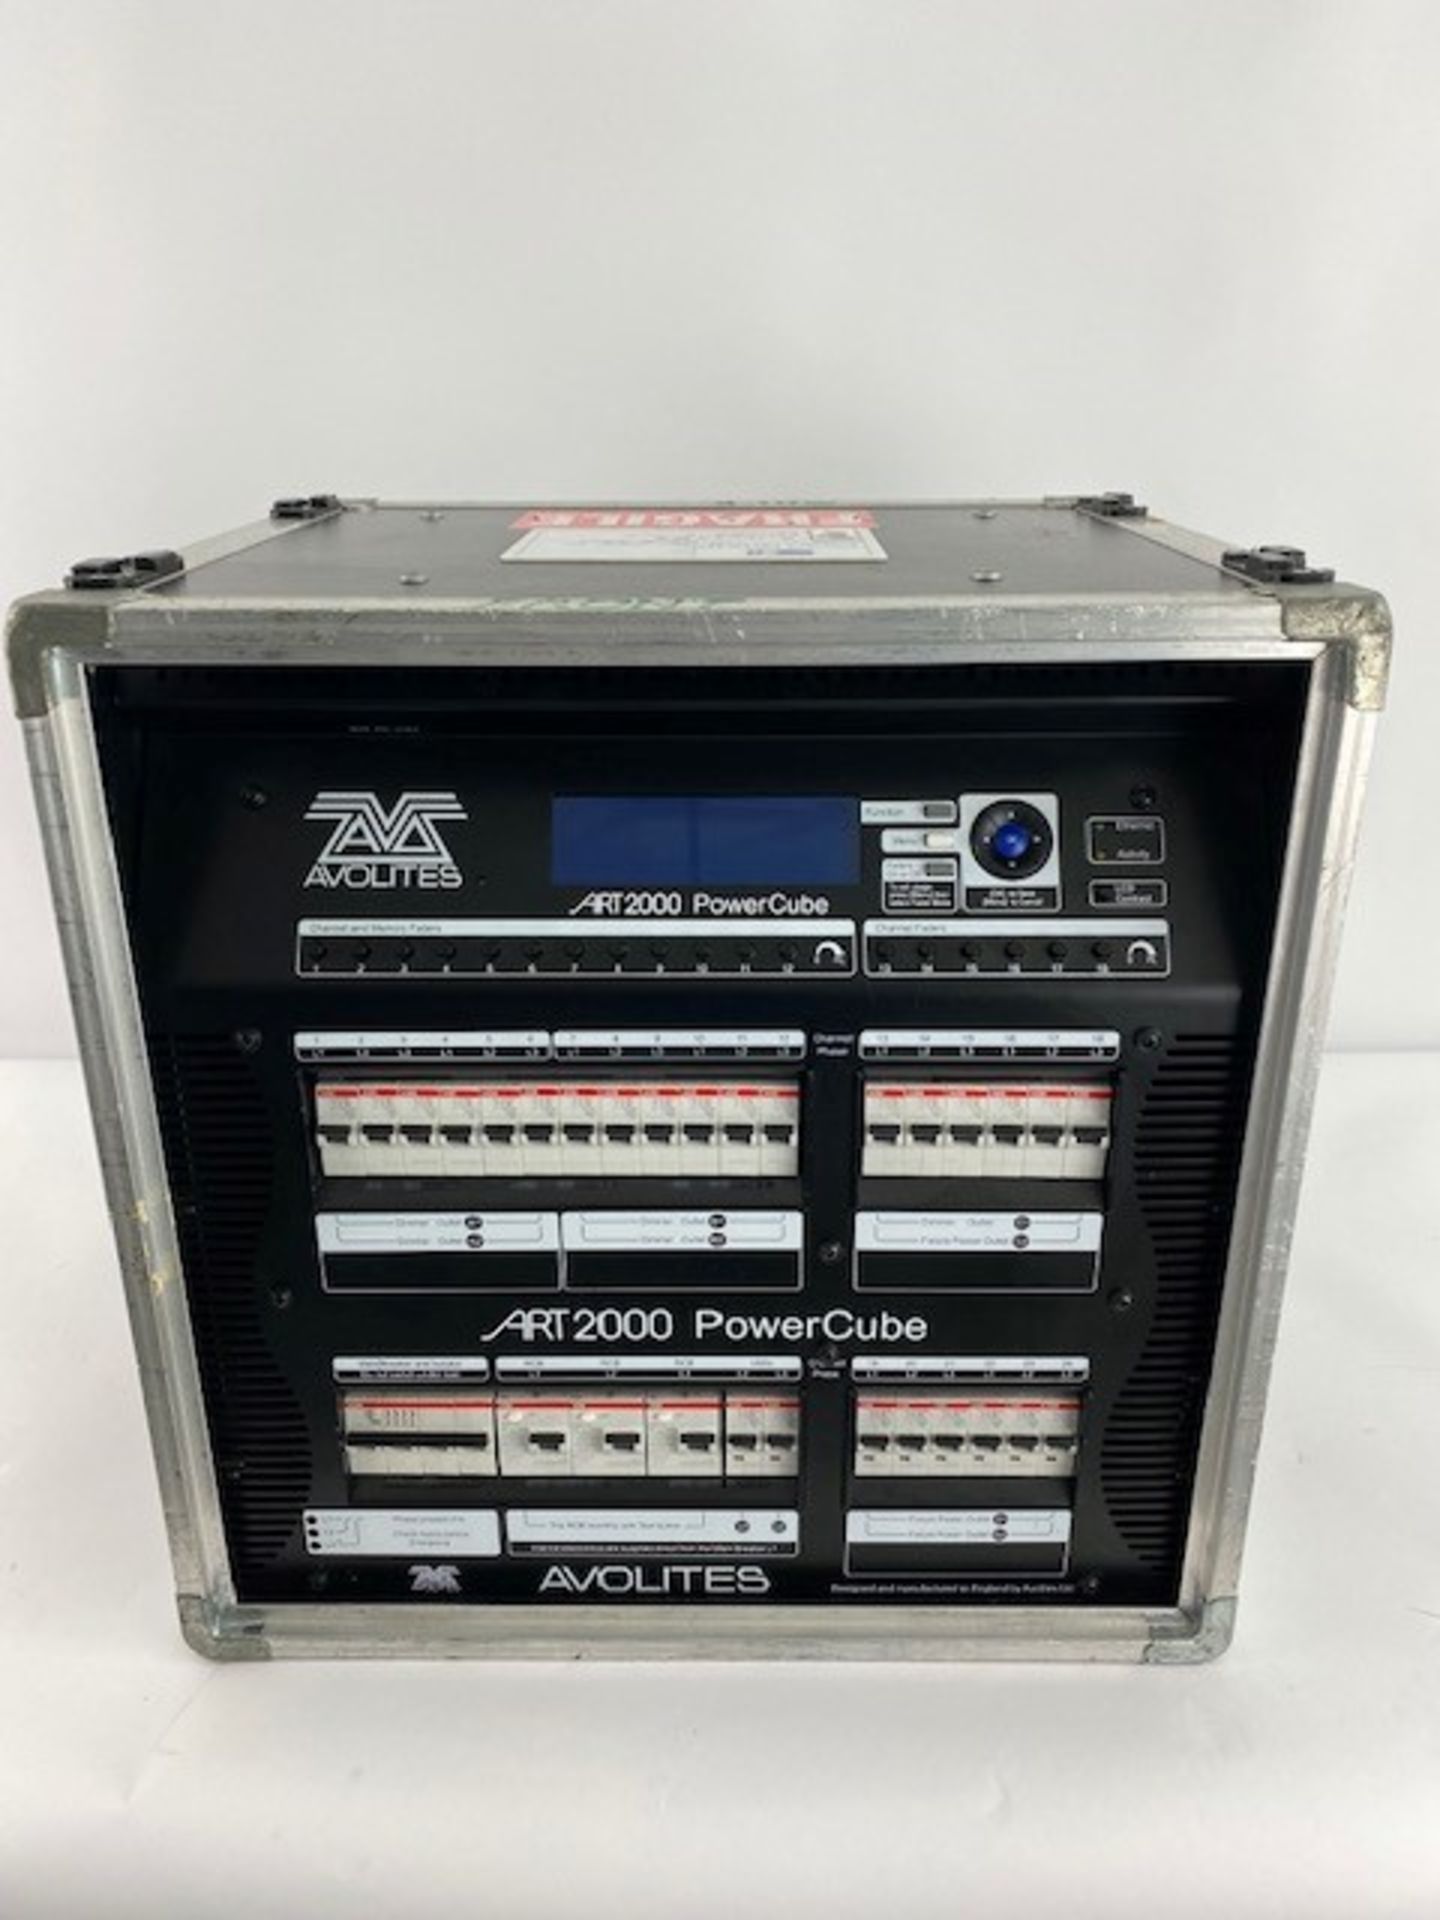 1 x Avolites Art 2000 Power Cube Dimming System - Ref: 76 - CL581 - Location: Altrincham WA14 A - Image 2 of 4